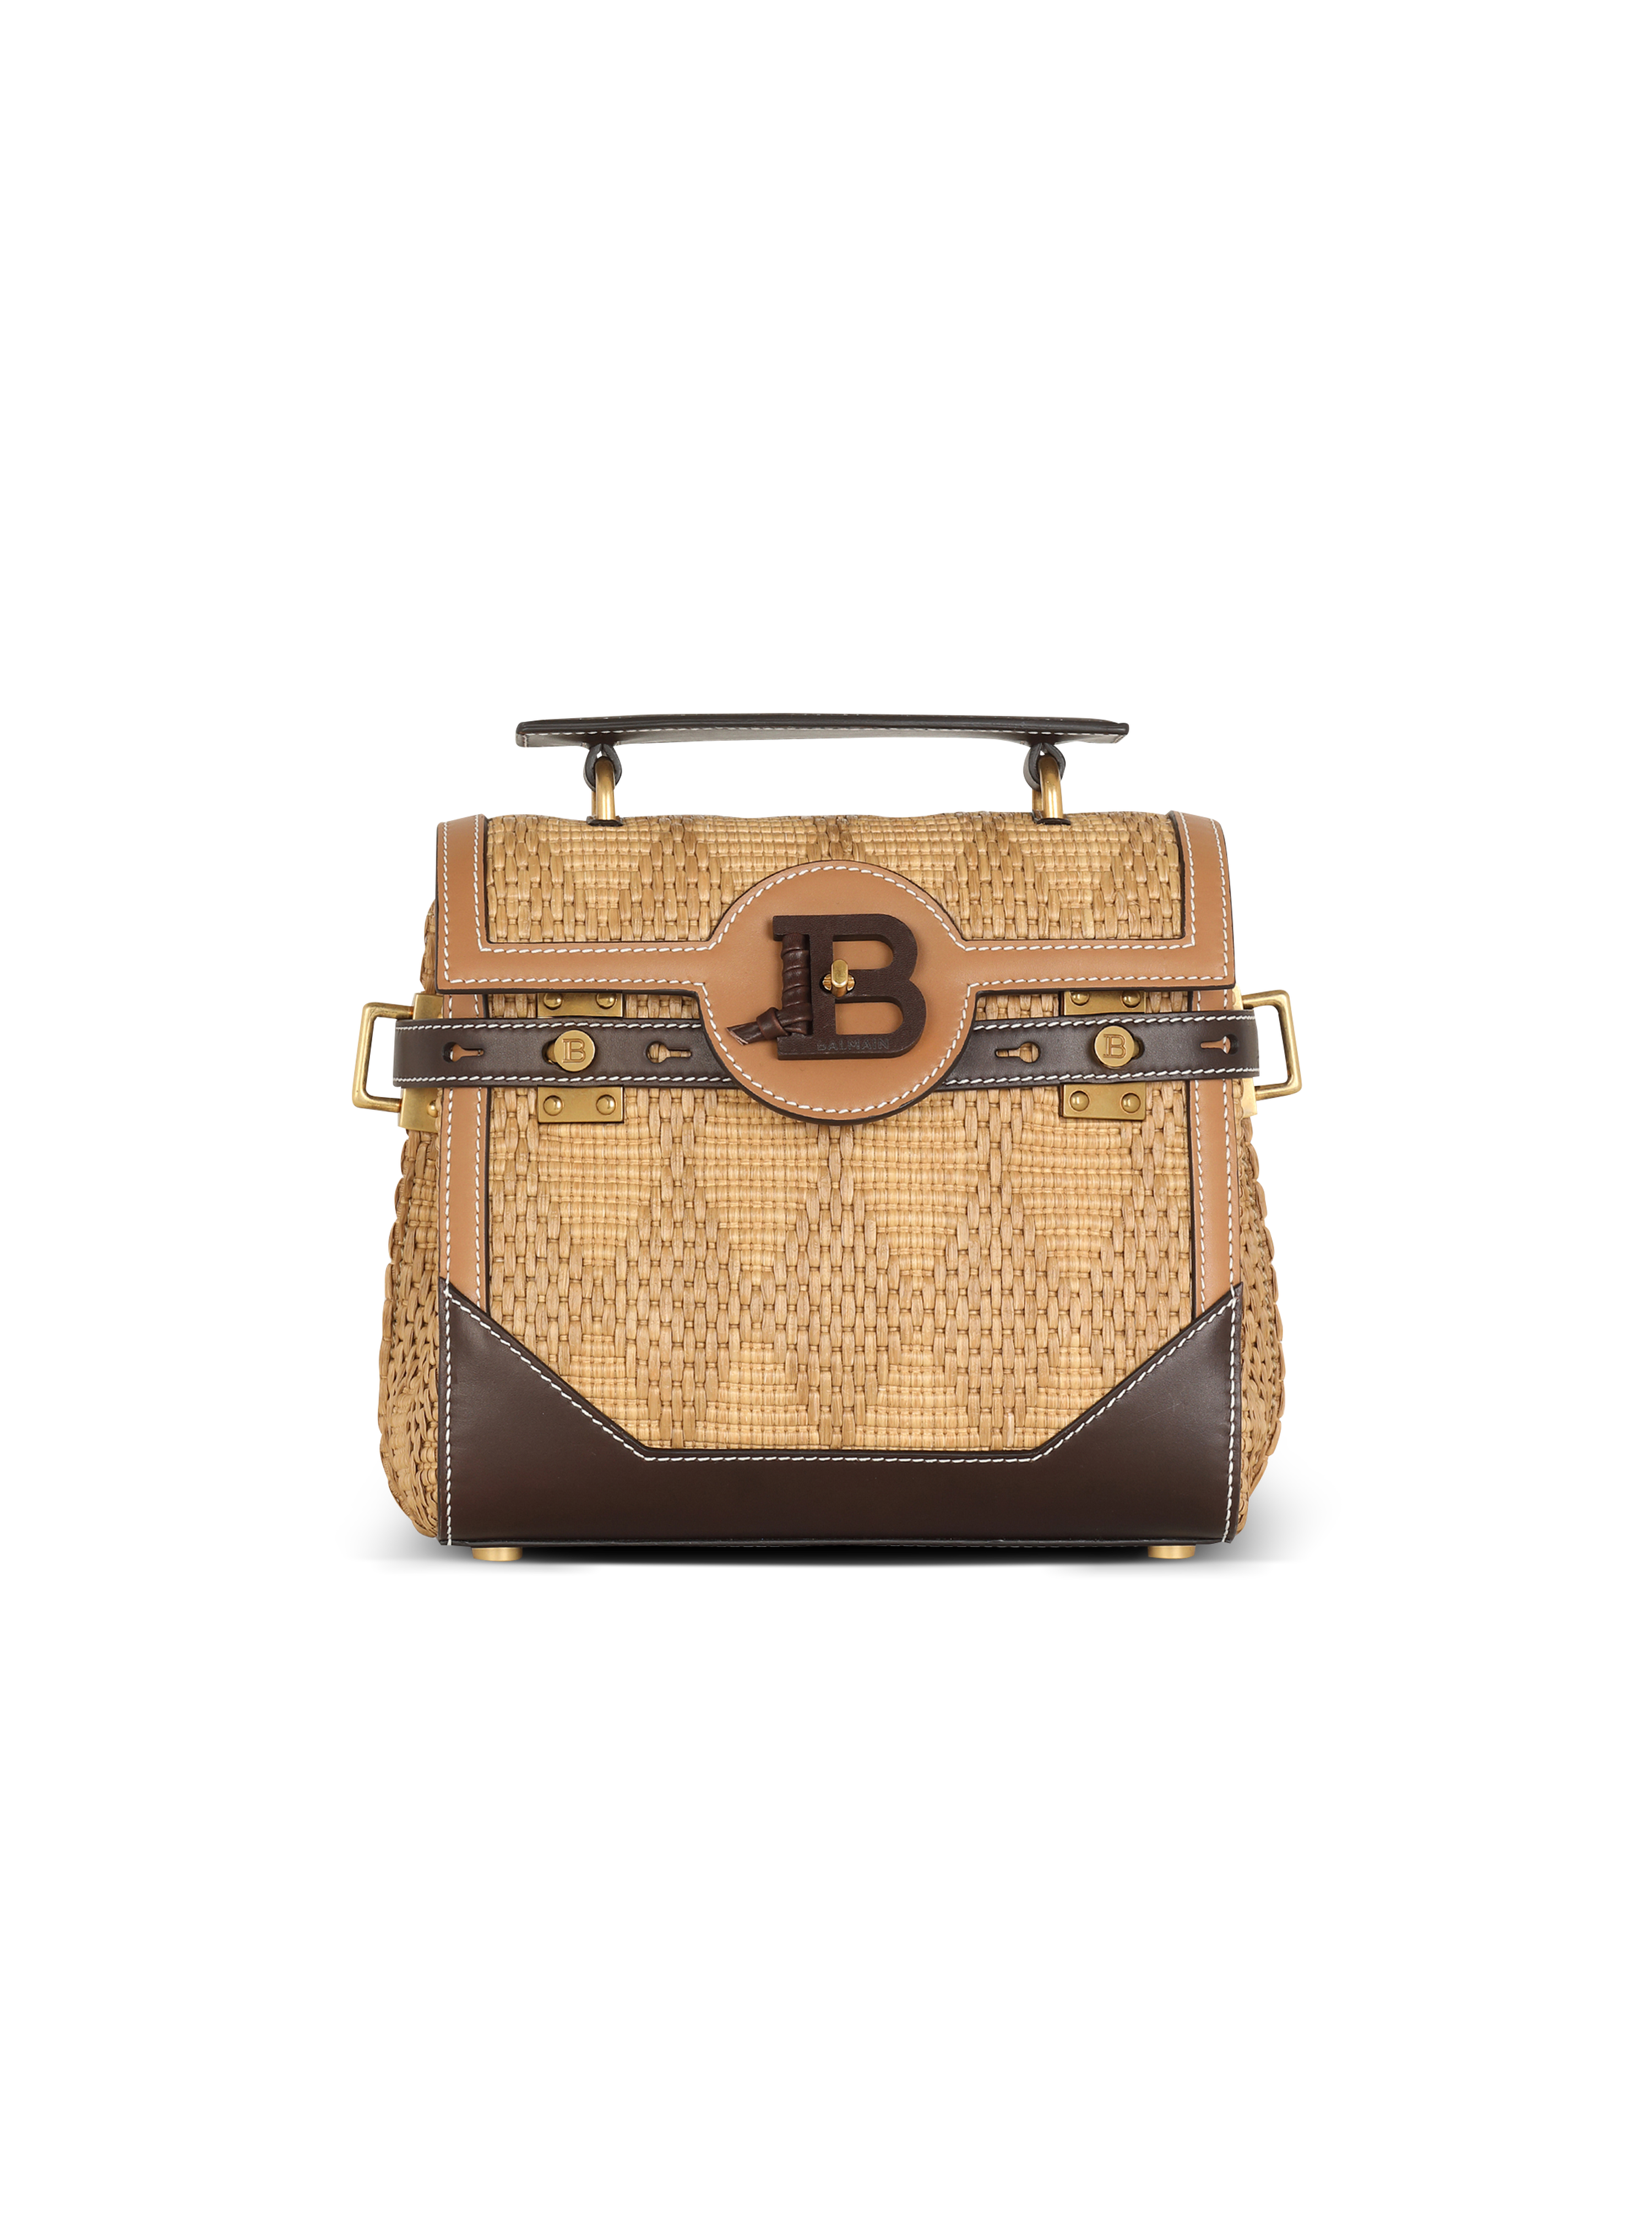 B-Buzz 23 leather and raffia bag, brown